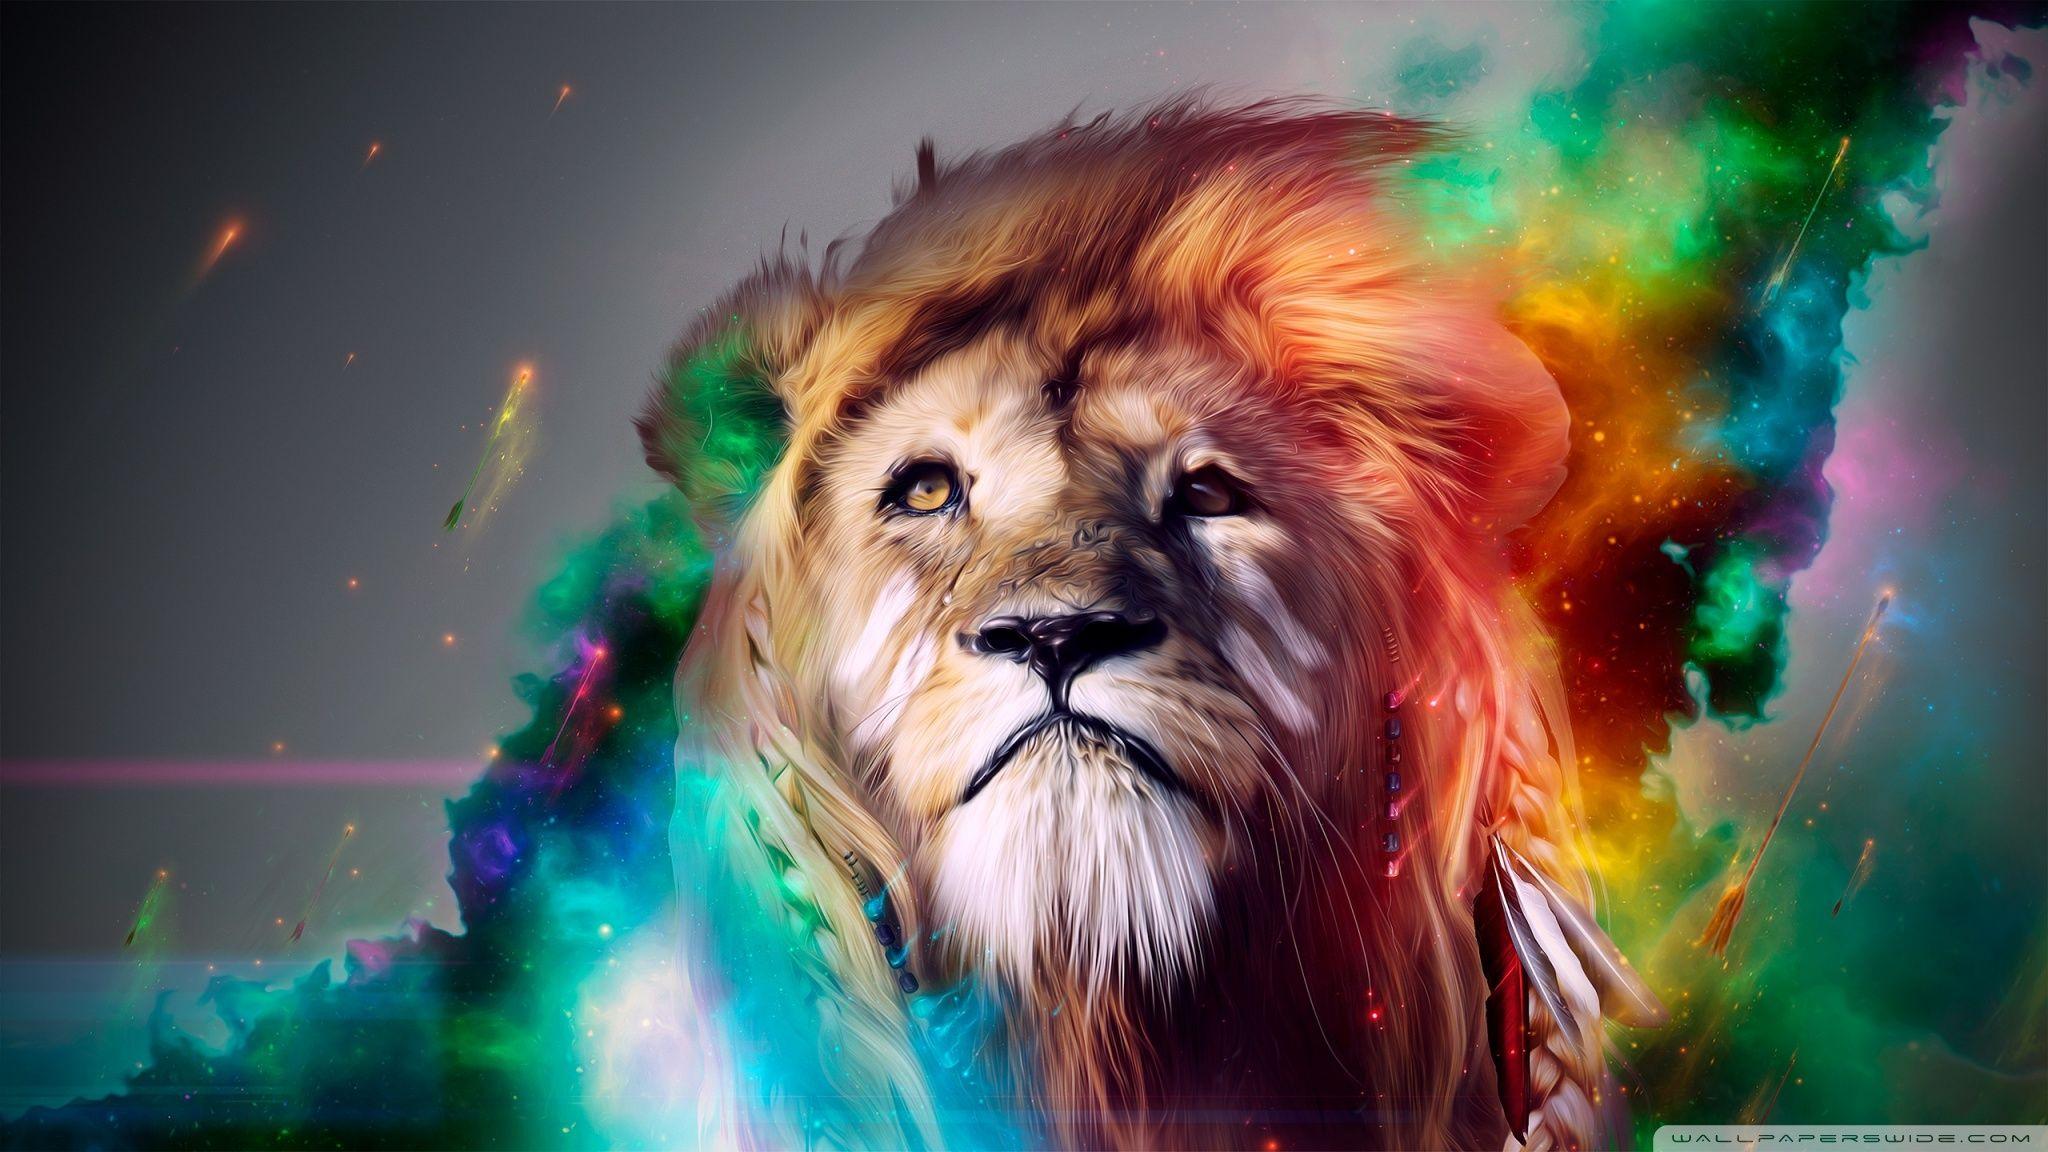 Beautiful Lion Wallpaper Hd For Mobile